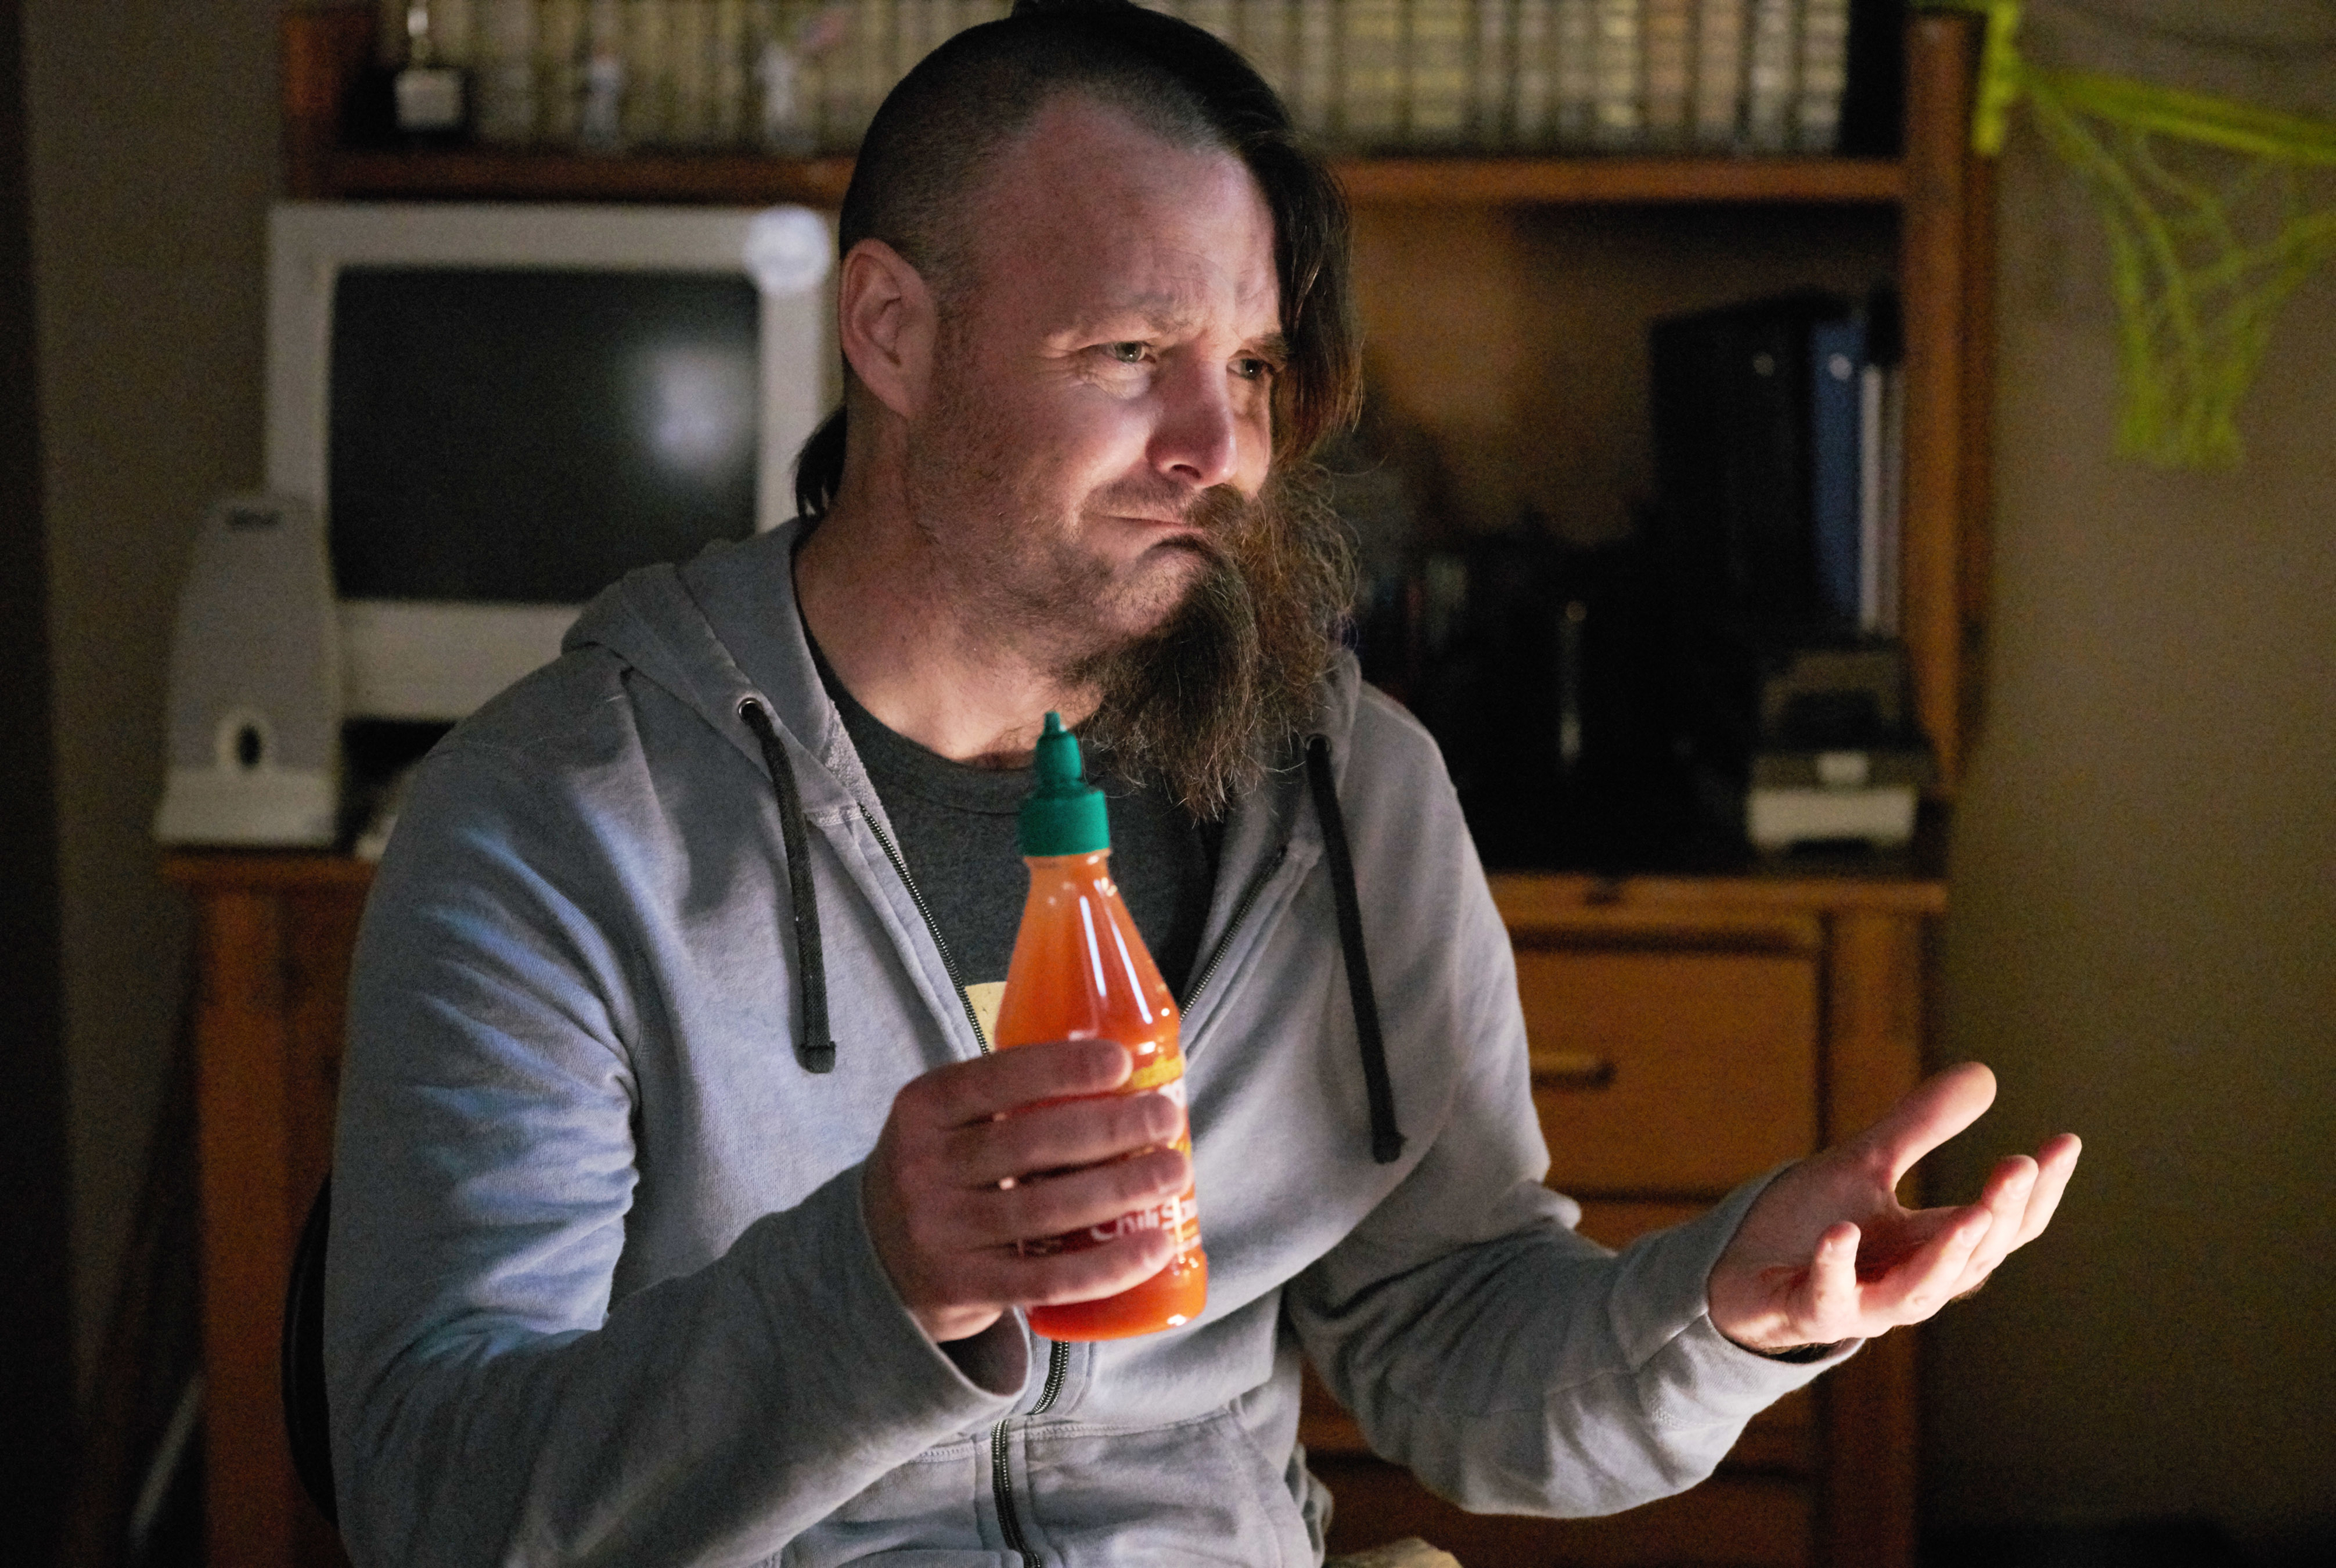 Actor in character holding a bottle, with a pensive expression, indoors